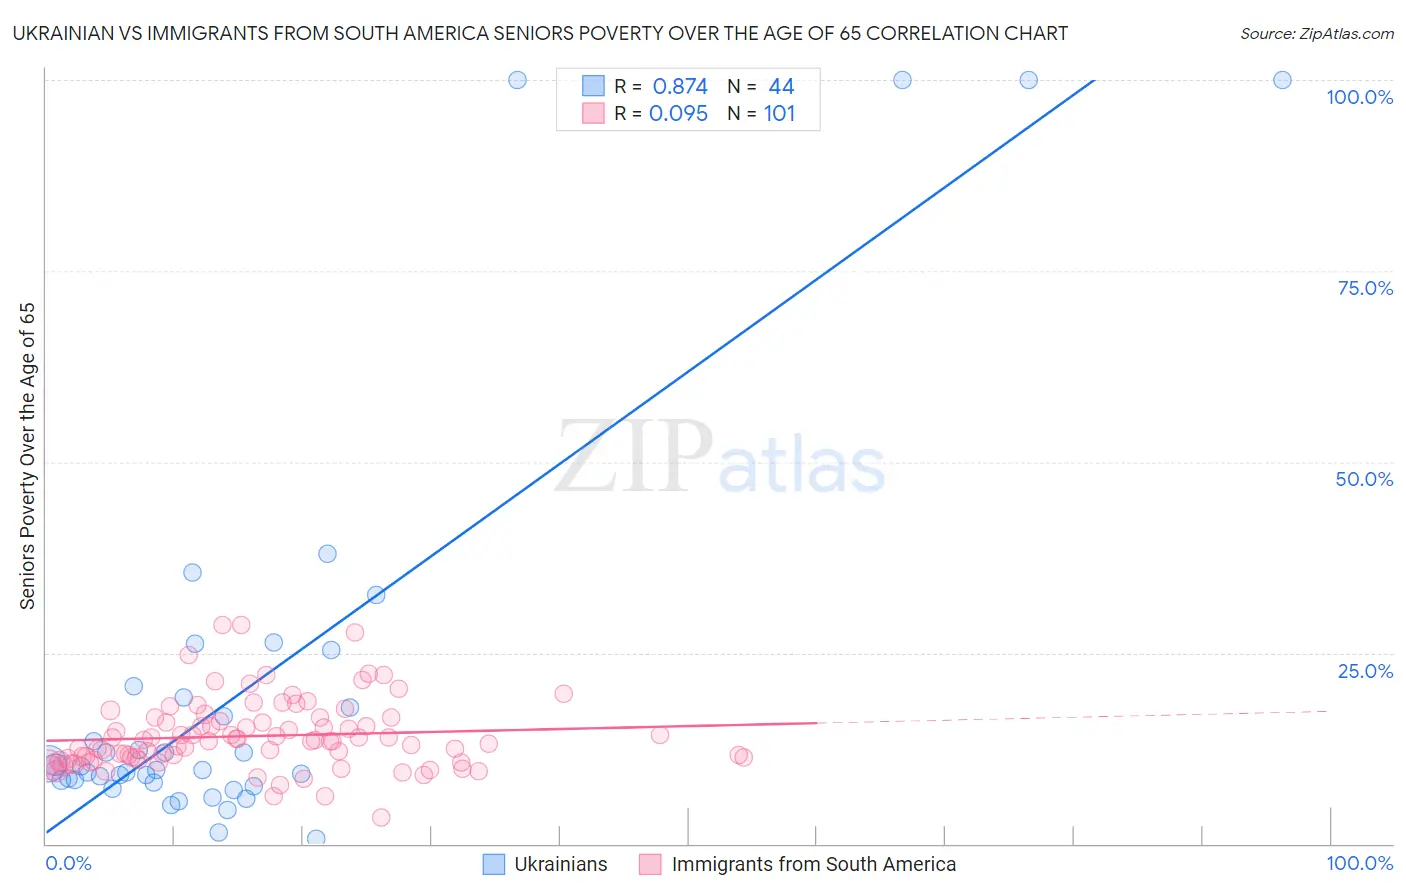 Ukrainian vs Immigrants from South America Seniors Poverty Over the Age of 65